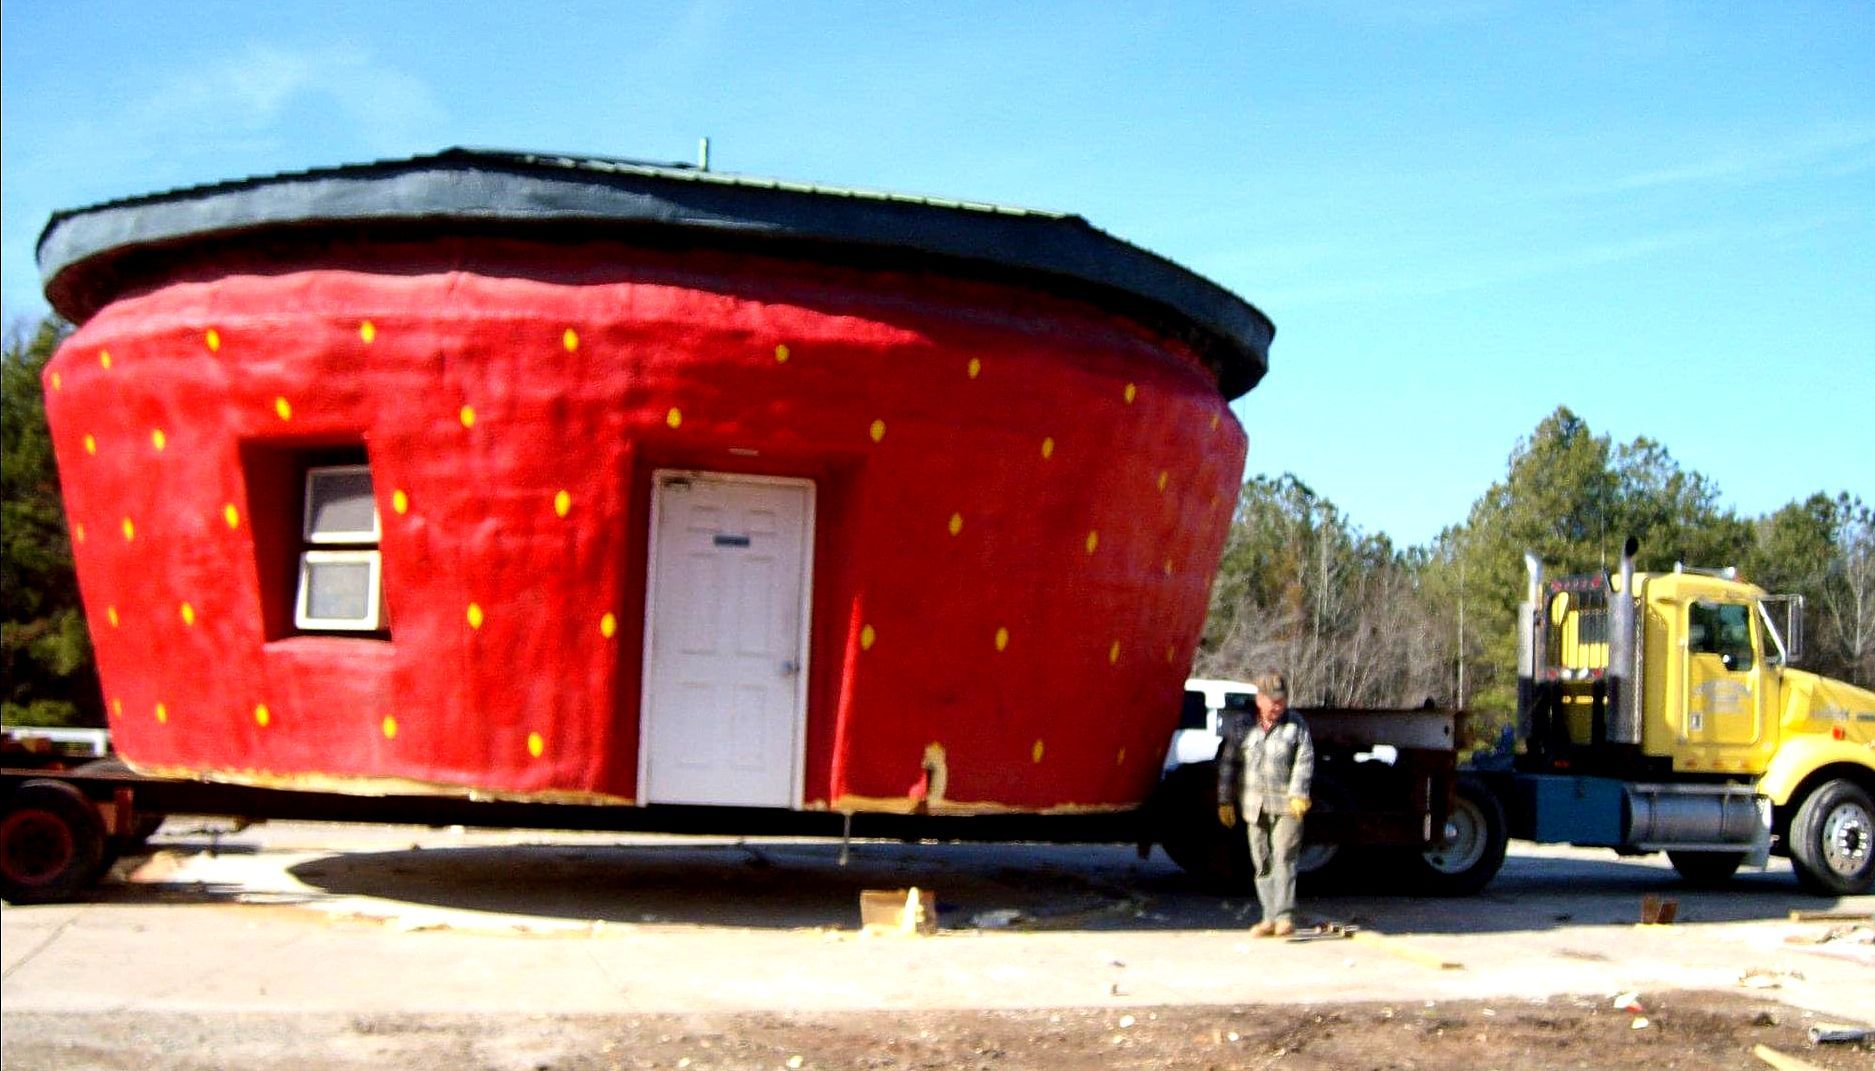 
World's Largest Strawberry-shaped Building, world record in Ellerbe, North Carolina